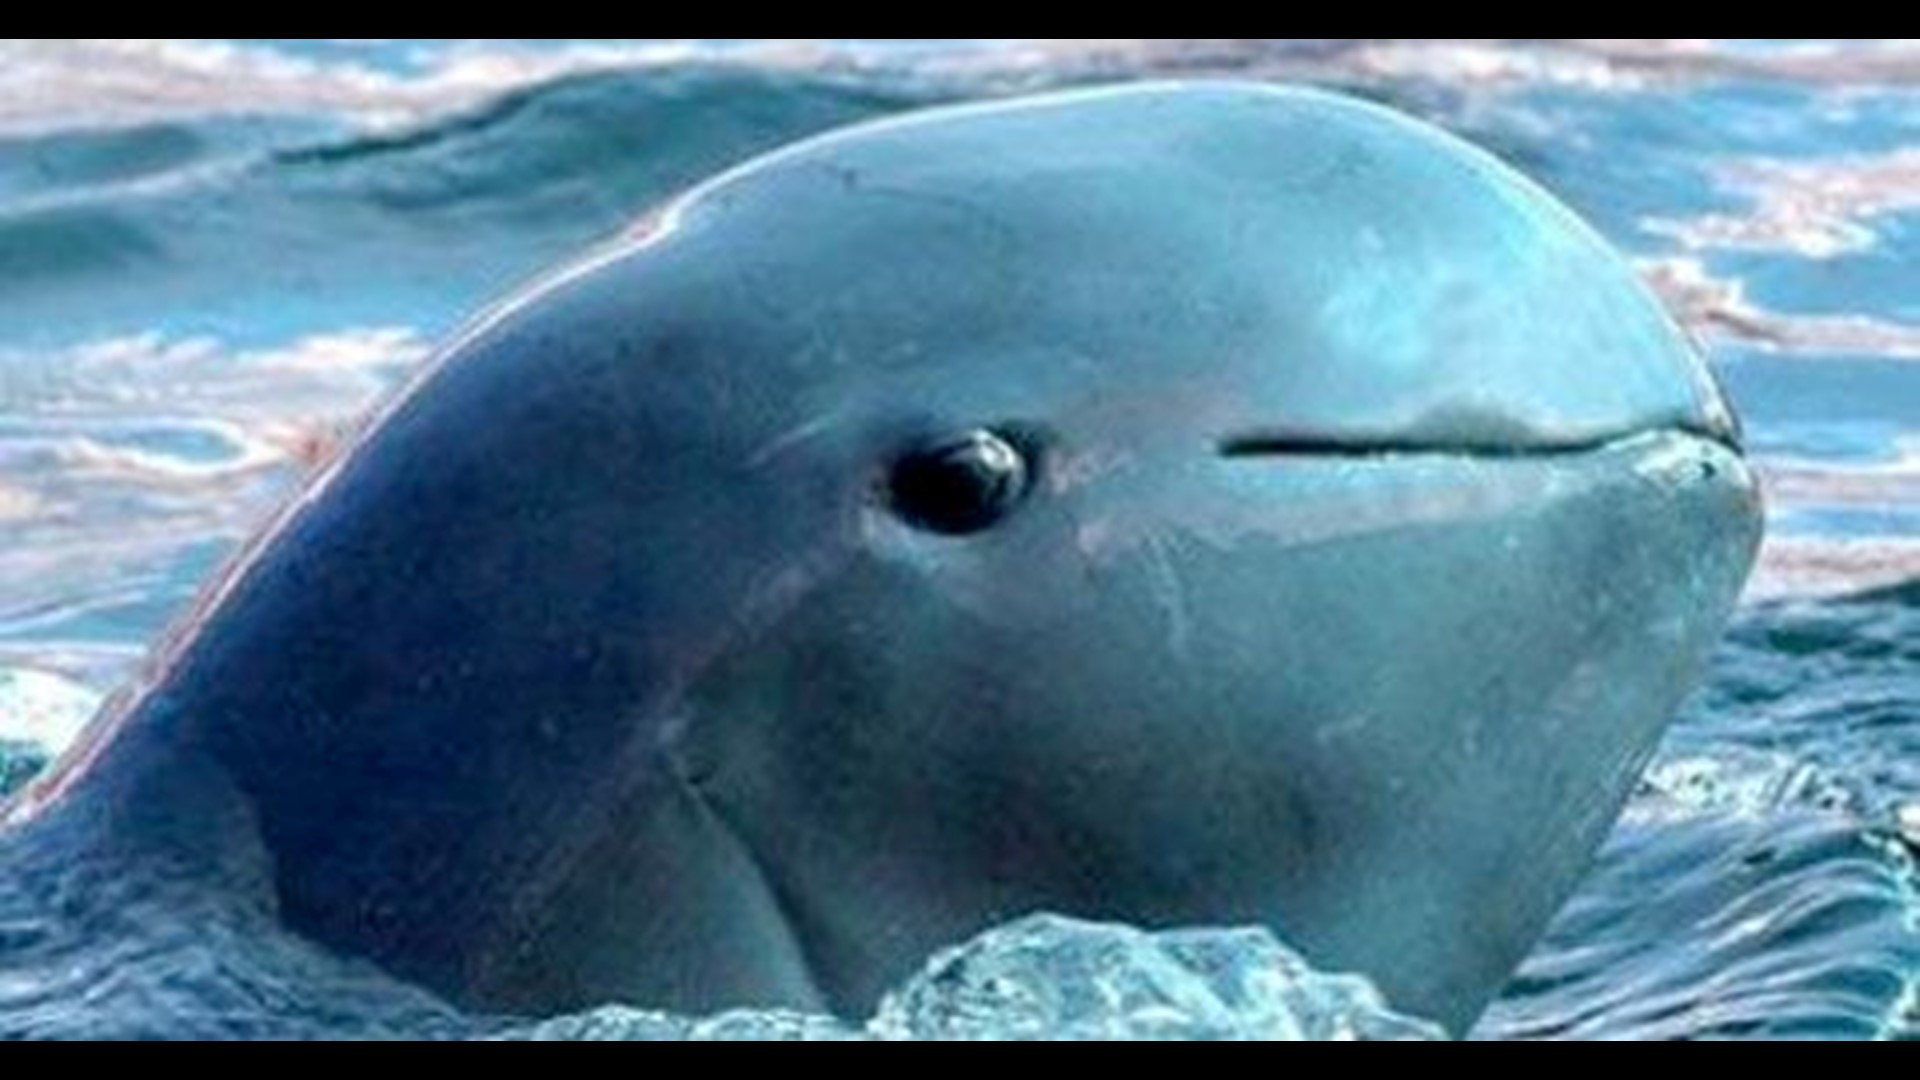 San Diego Zoo saves viable cells from endangered Vaquita Porpoise